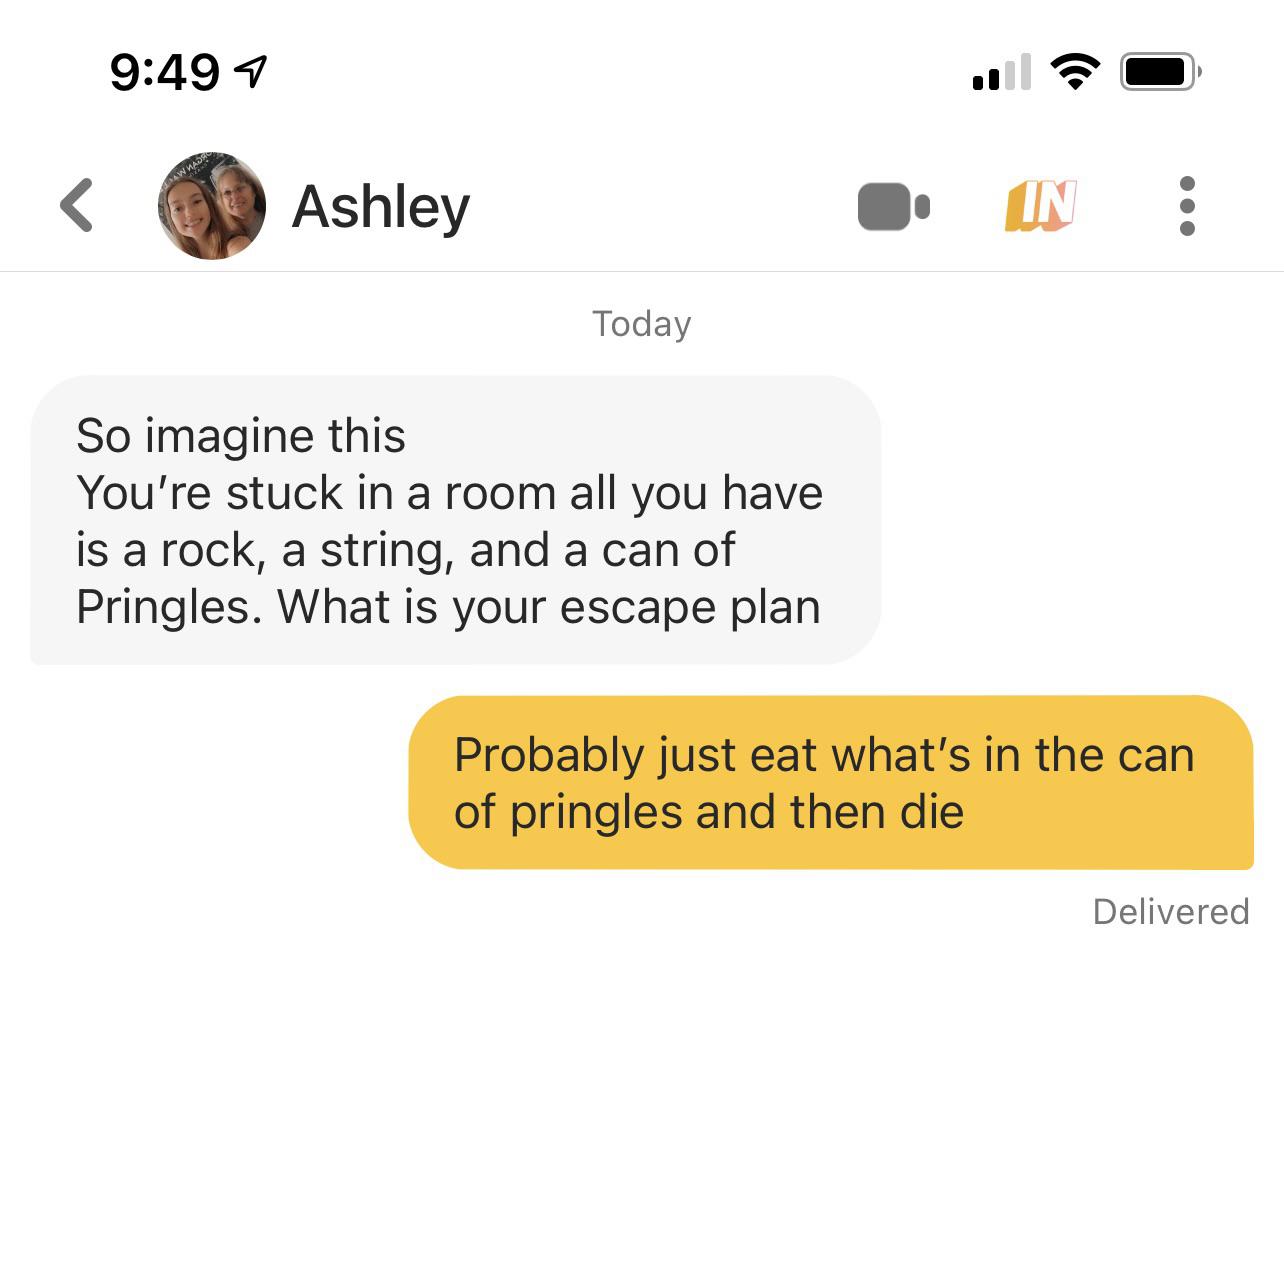 1 Aw Maja Ashley In Today So imagine this You're stuck in a room all you have is a rock, a string, and a can of Pringles. What is your escape plan Probably just eat what's in the can of pringles and then die Delivered